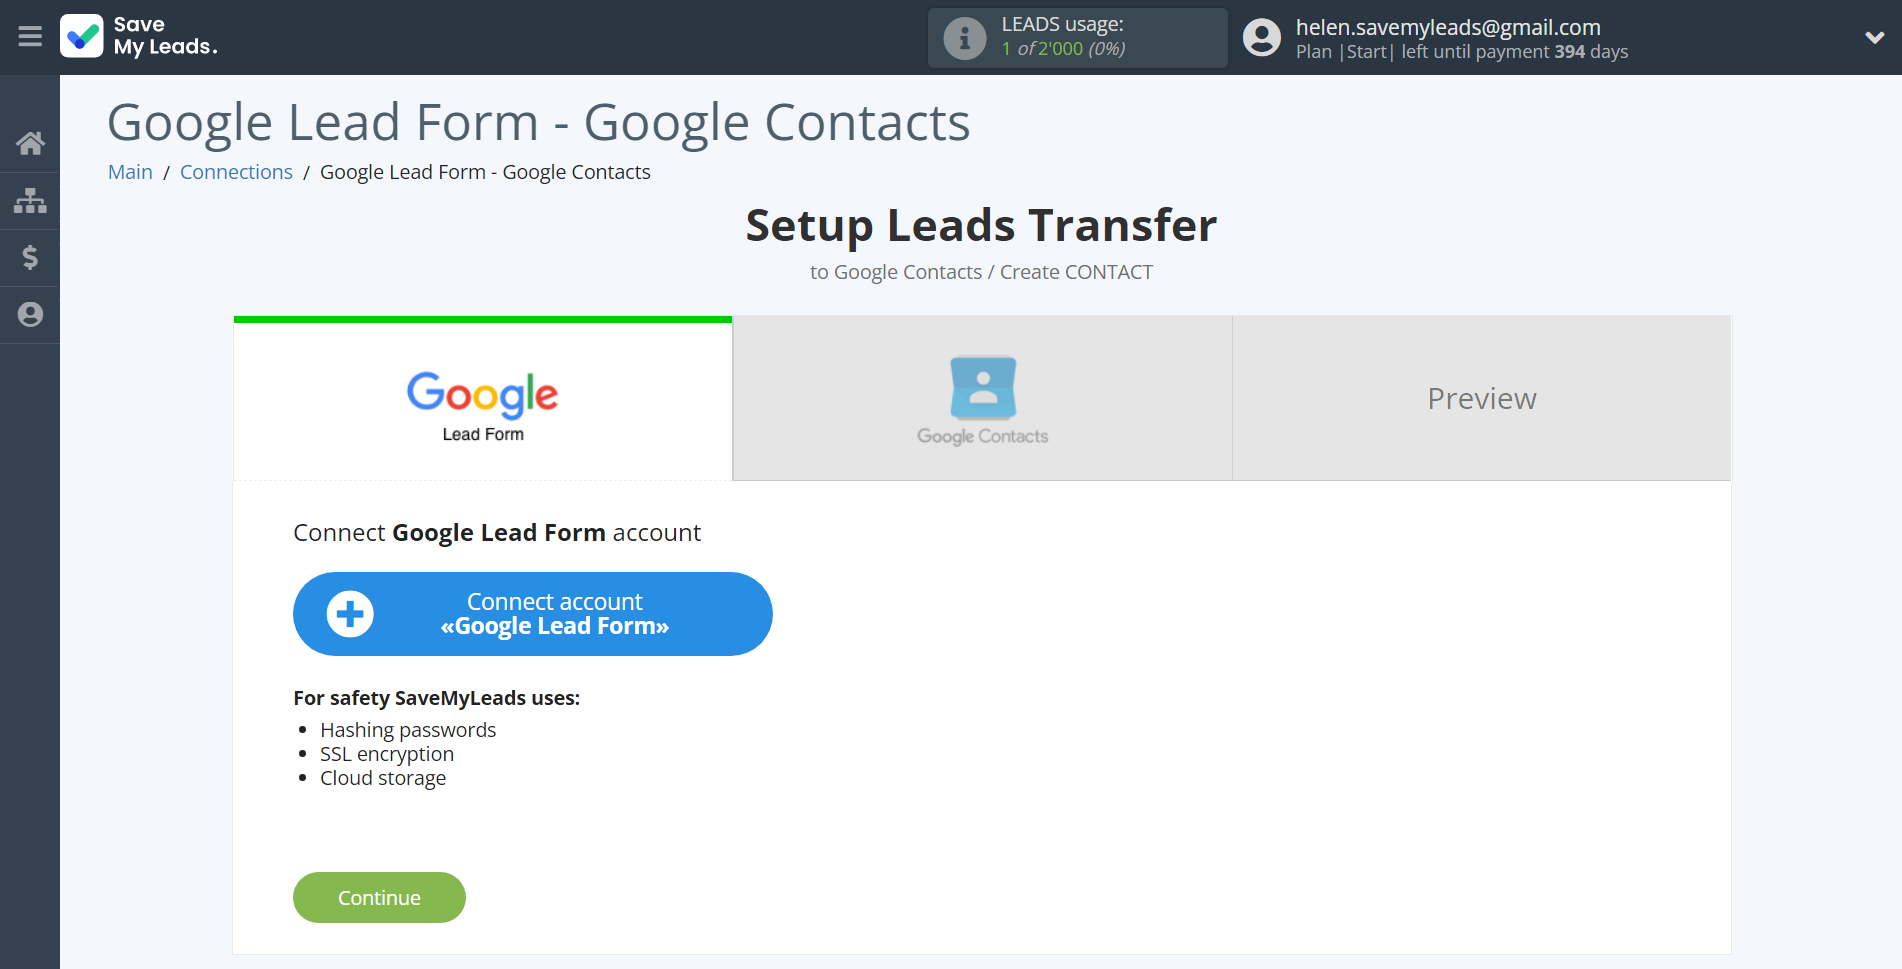 How to Connect Google Lead Form with Google Contacts | Data Source account